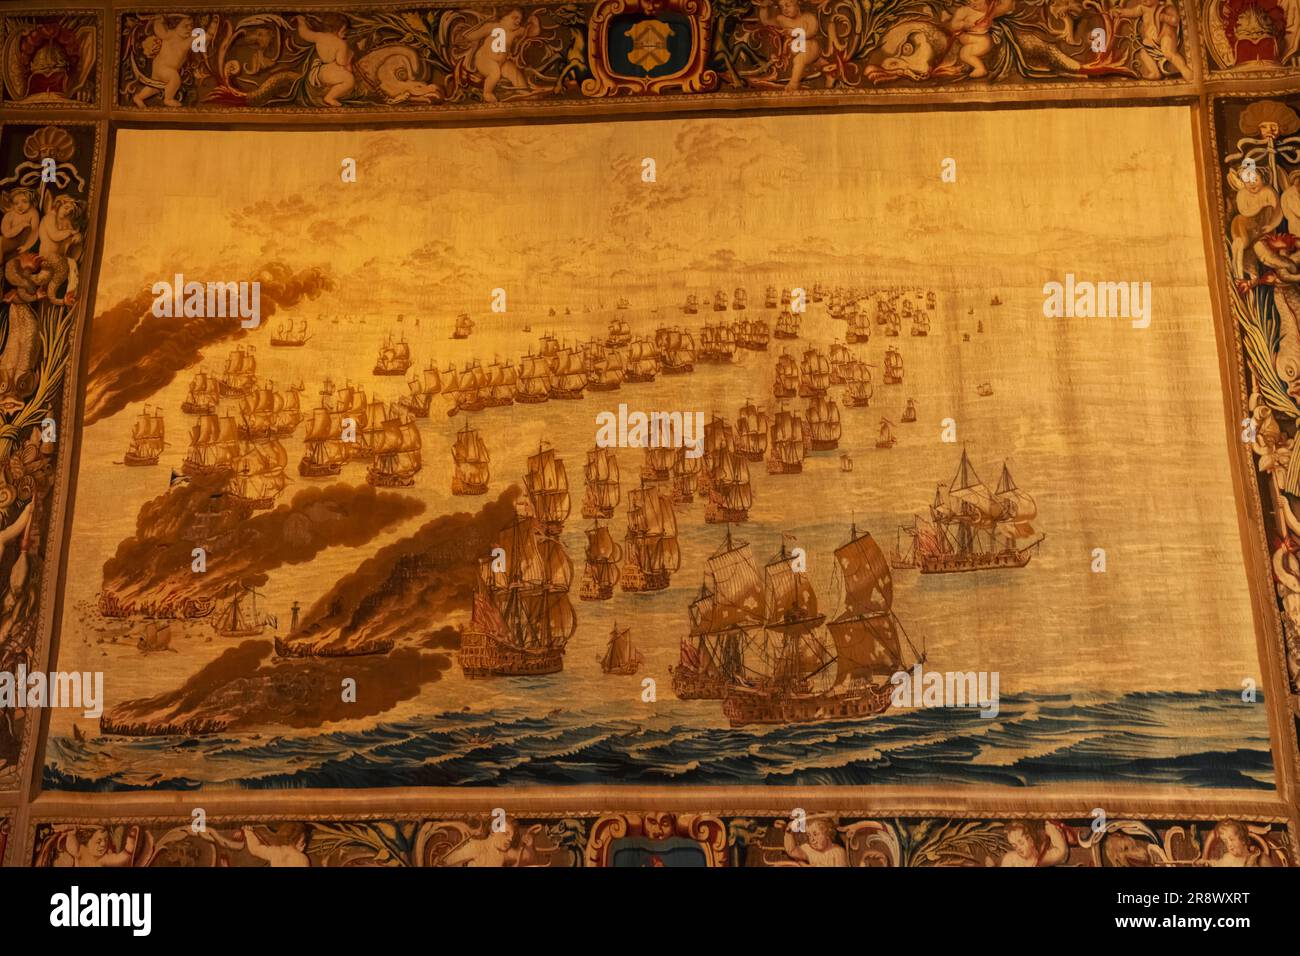 England, London, Greenwich, The Queen's House, Tapestry depicting The Burning of the Royal James at the Battle of Solebay 28 May 1672 during the Third Stock Photo